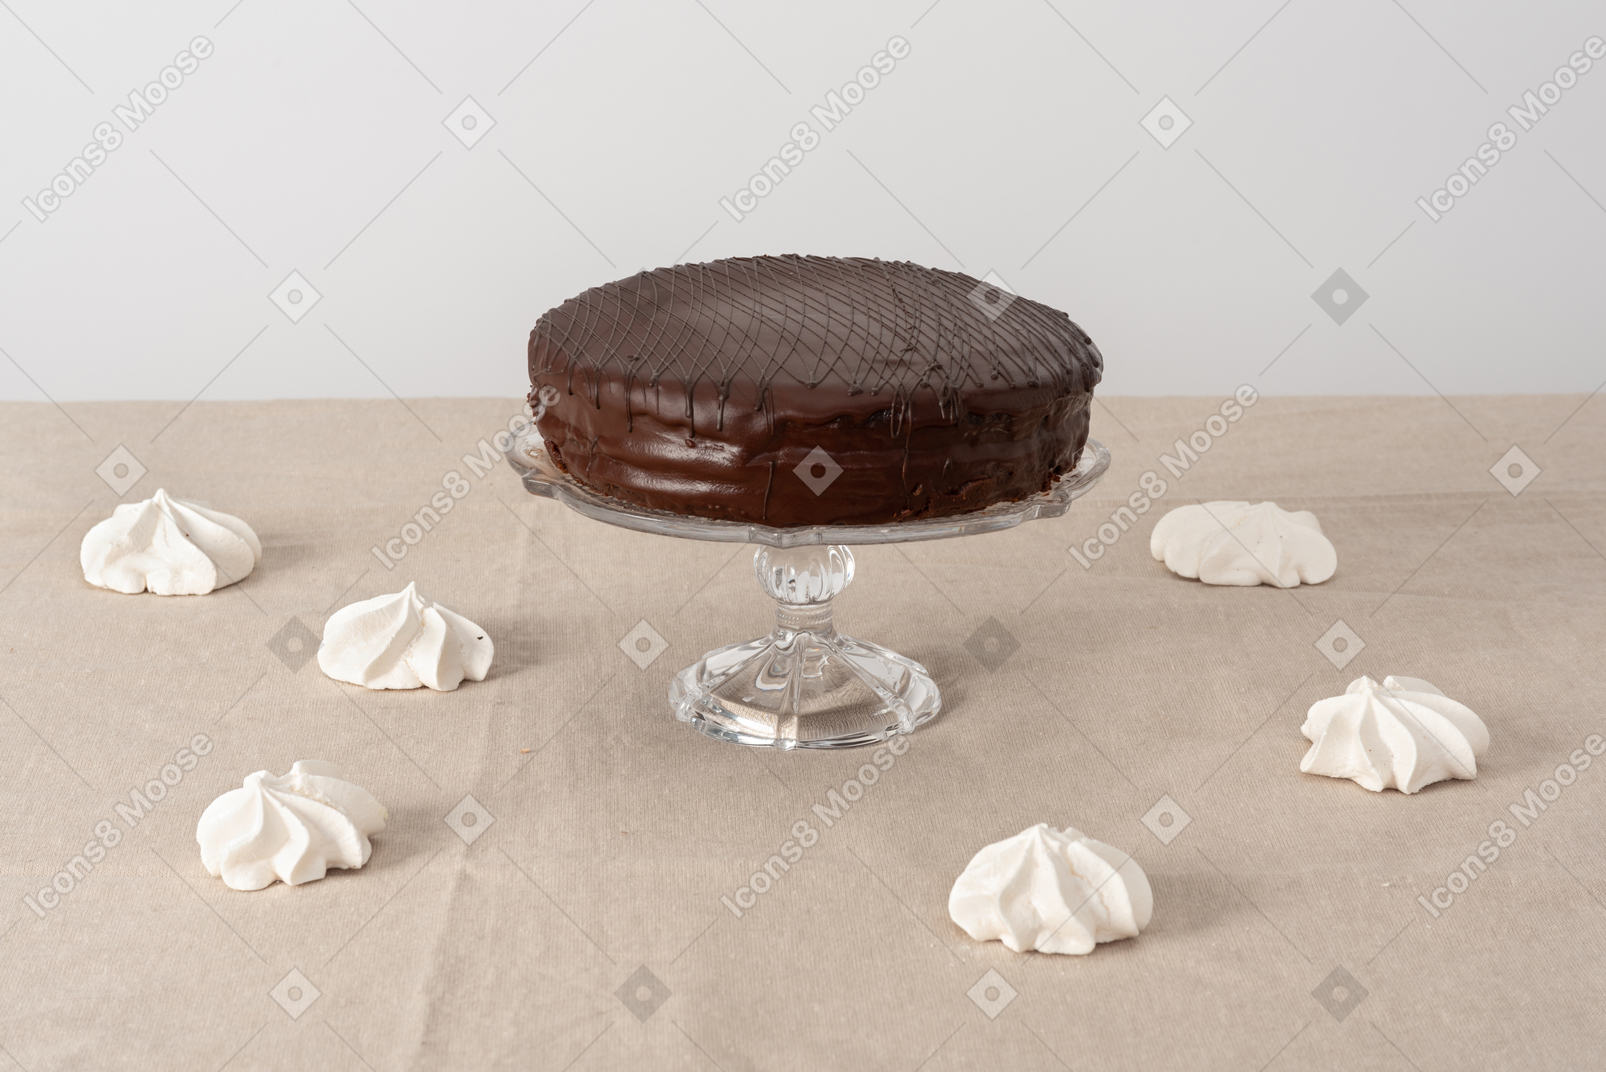 Chocolate cake on glass cake stand and zephyr